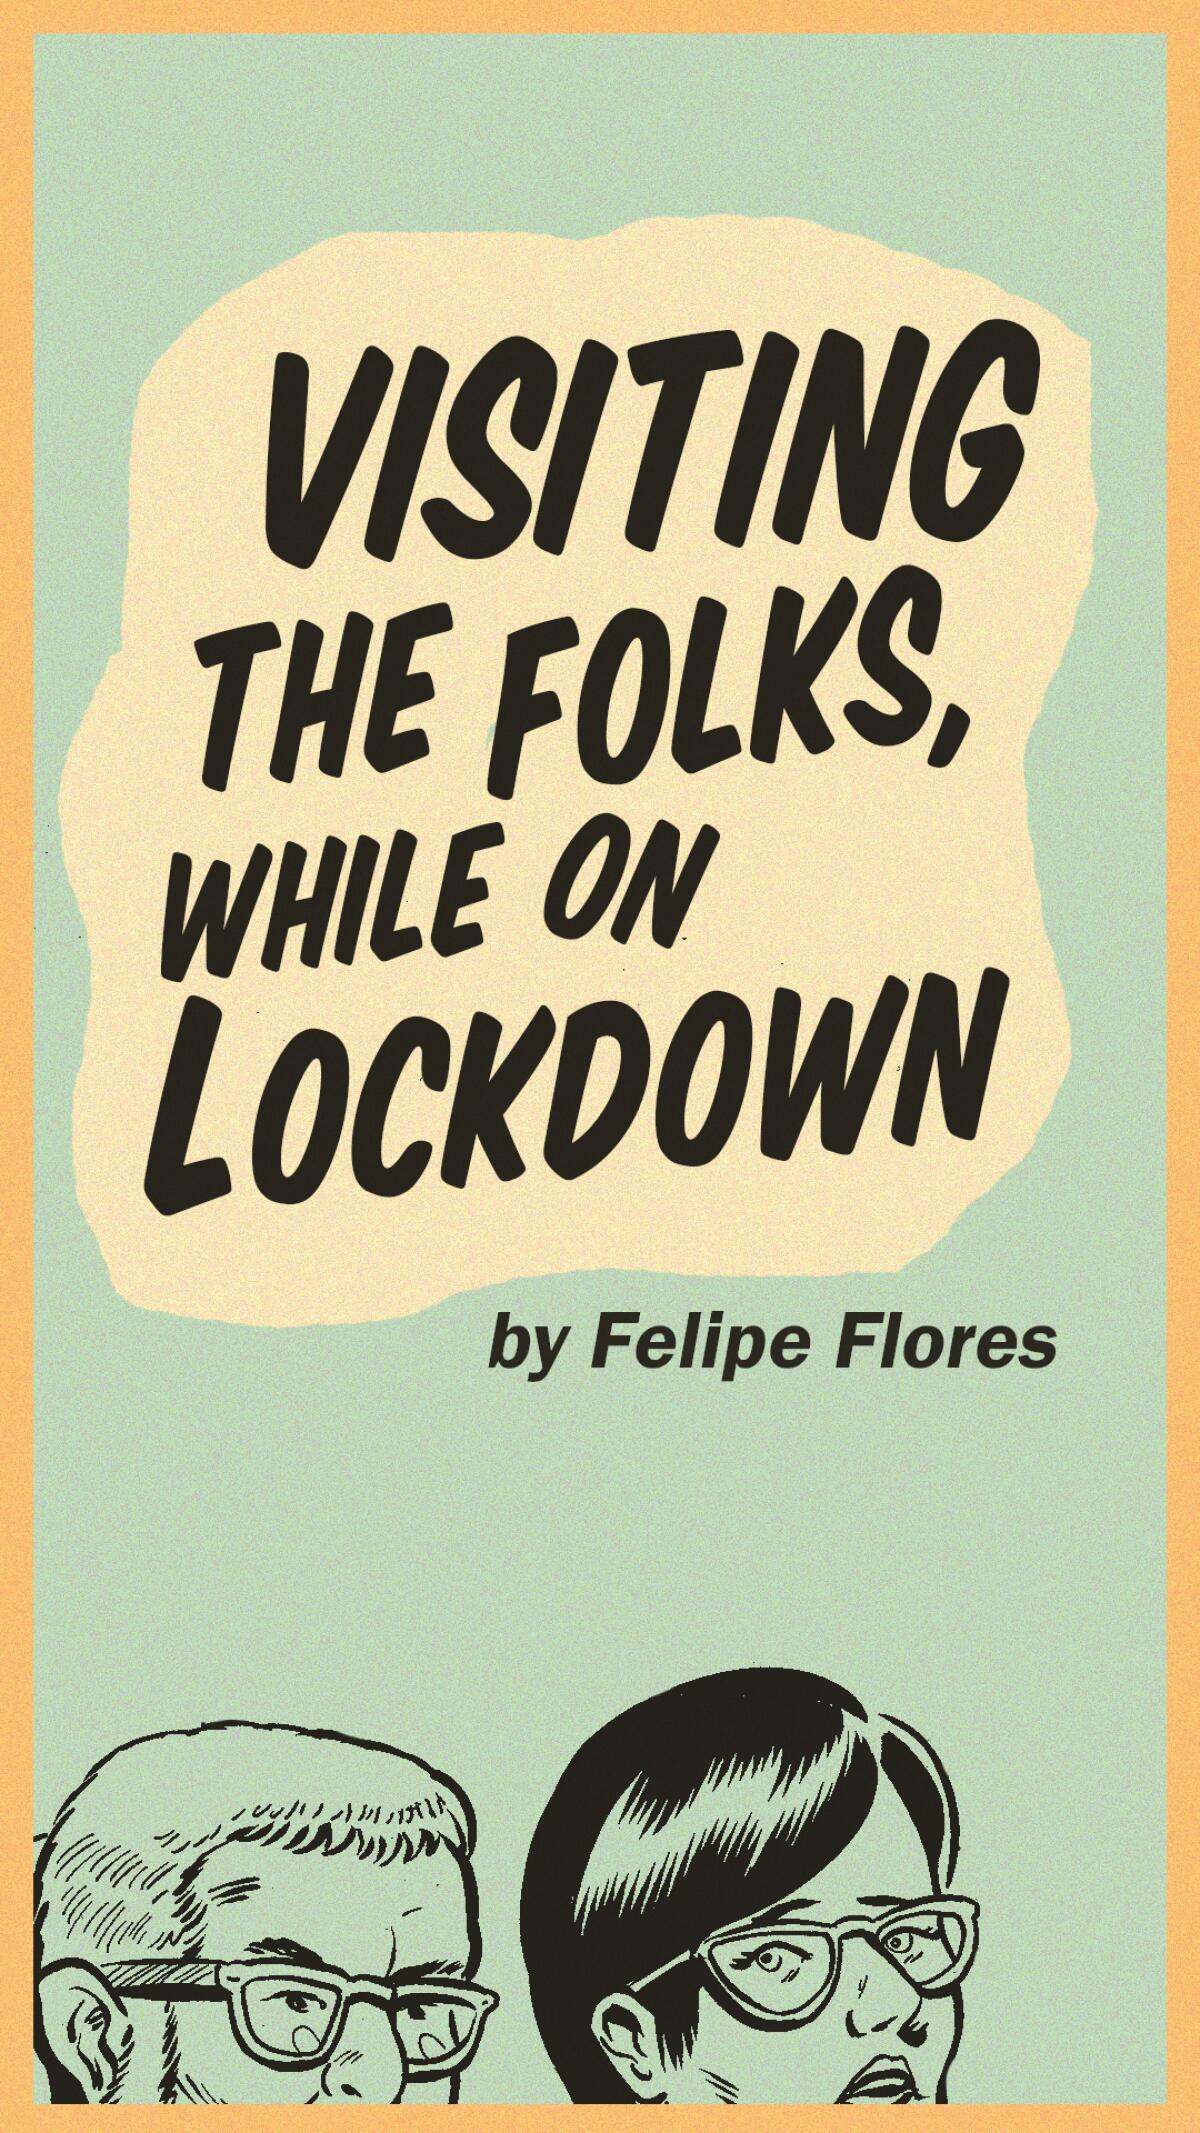 Visiting the folks while on lockdown, a comic by Felipe Flores.